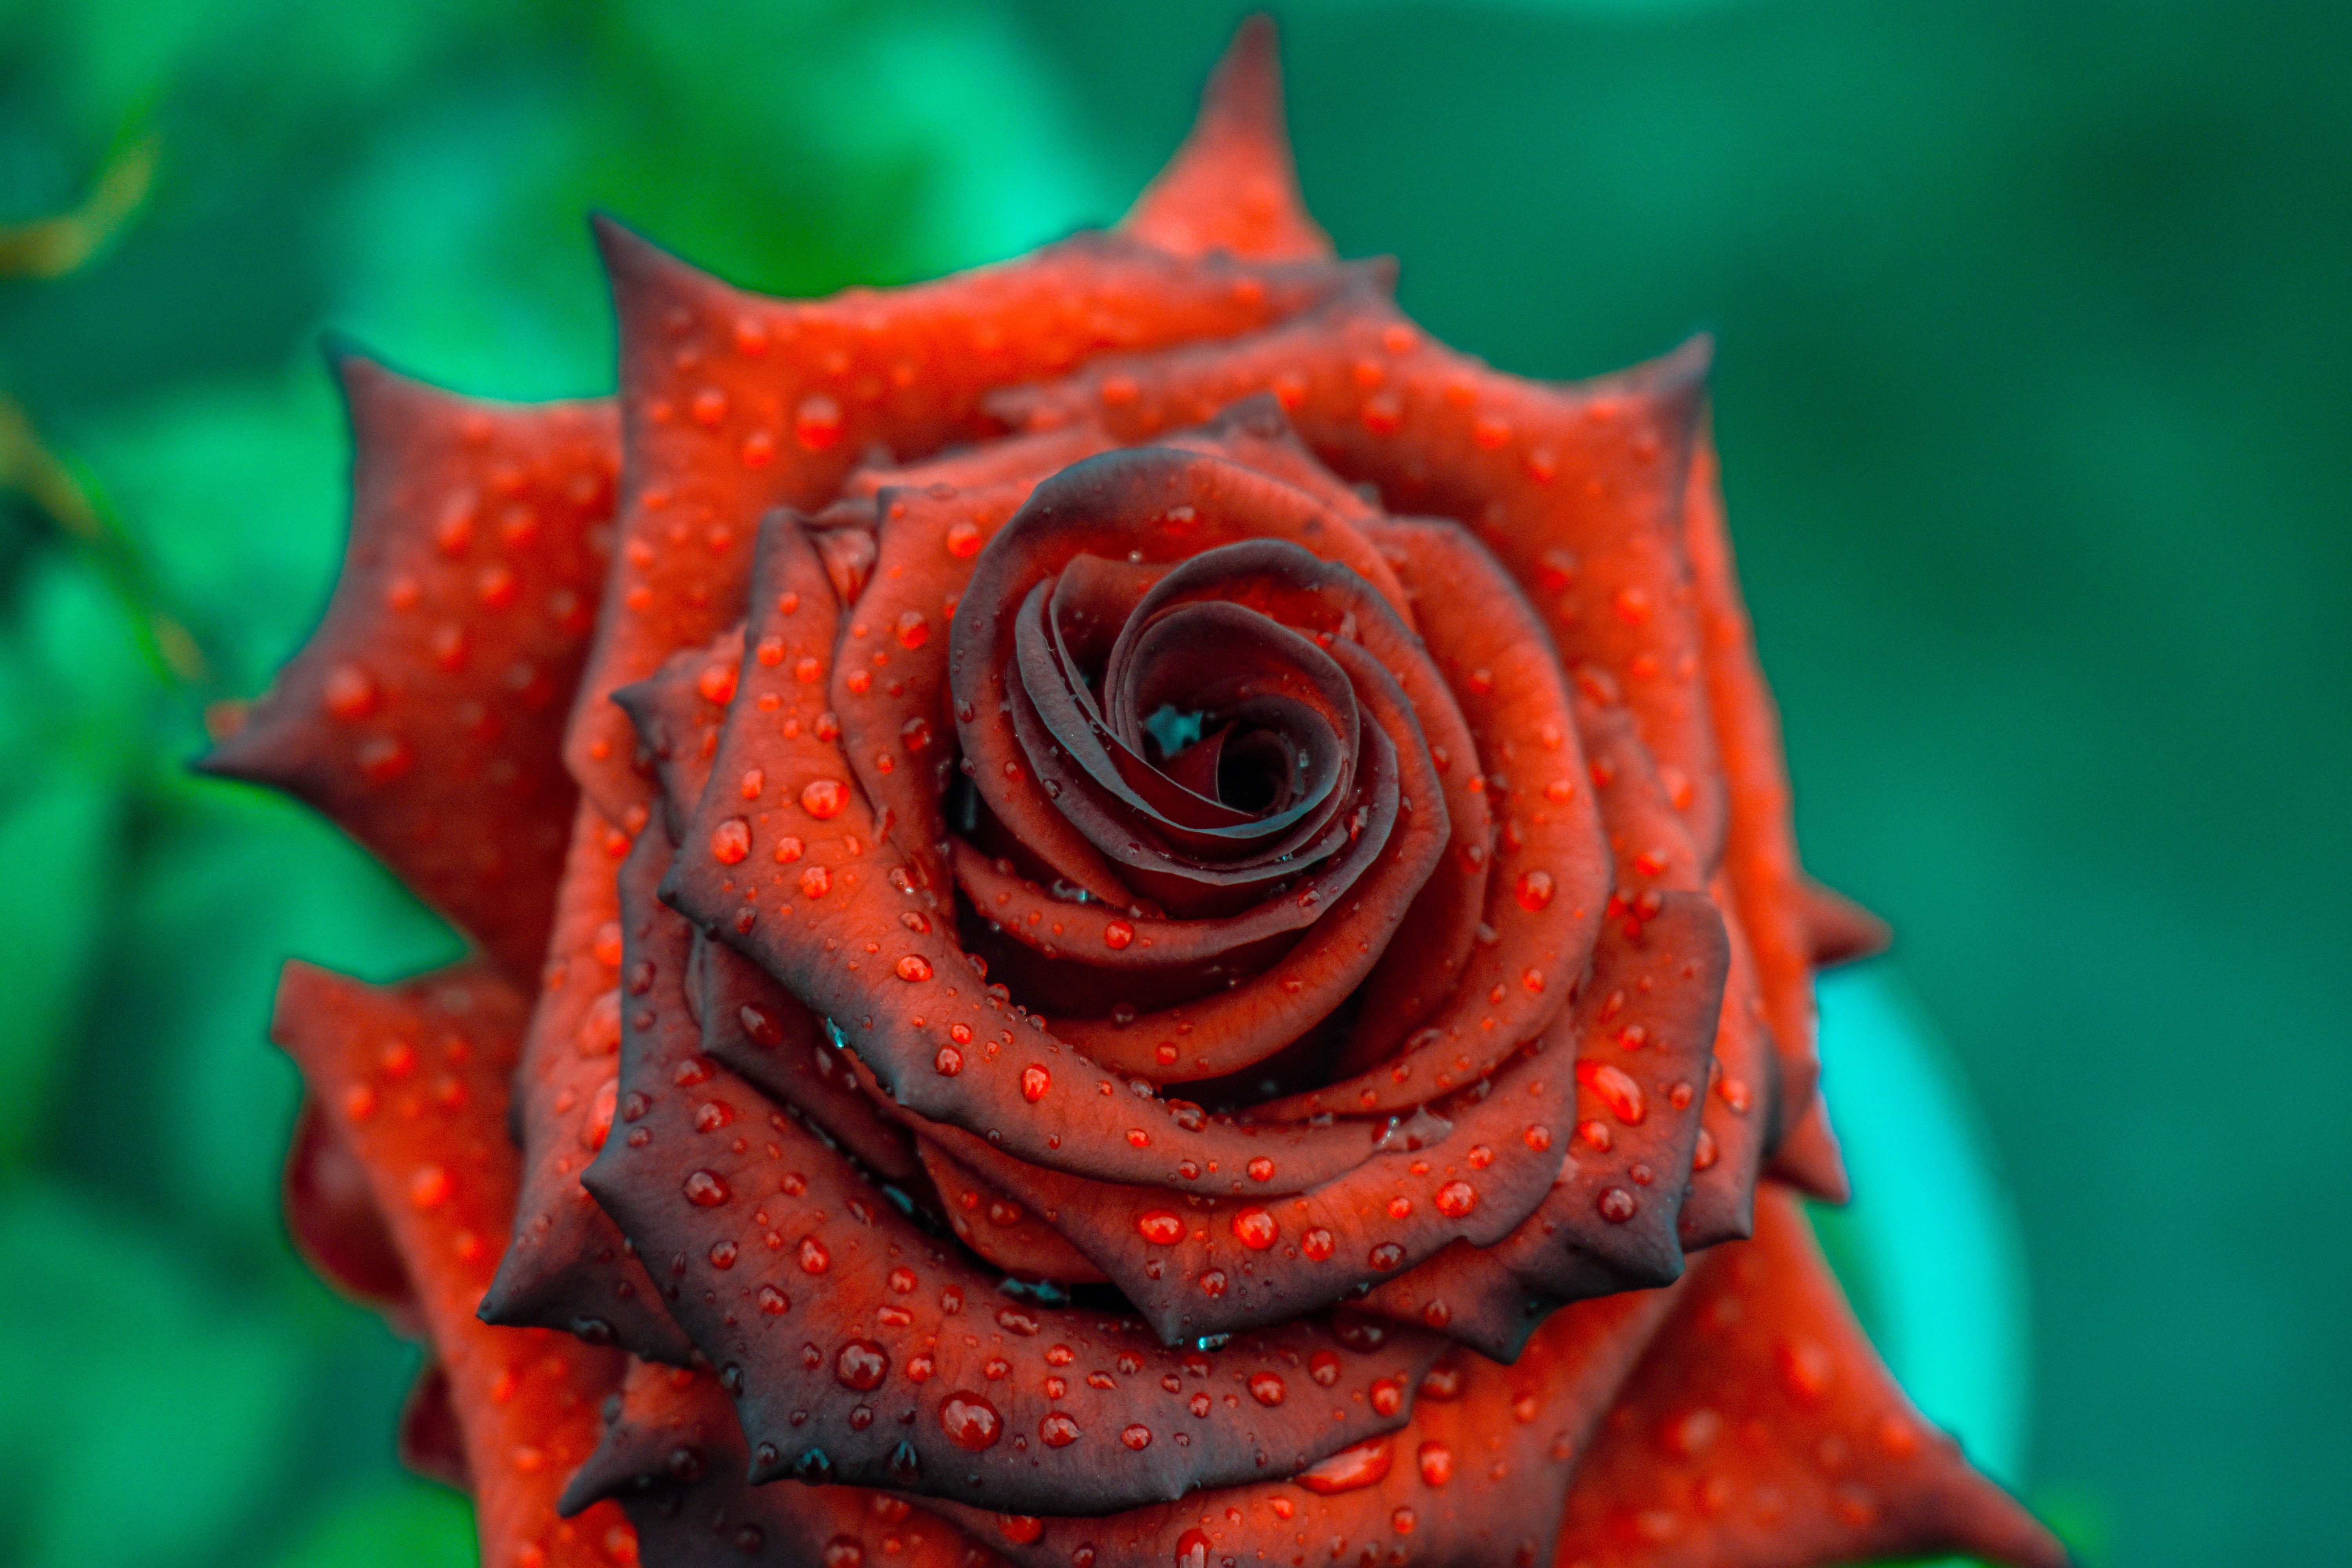 111029 download wallpaper rose flower, flowers, drops, red, rose, petals, bud screensavers and pictures for free